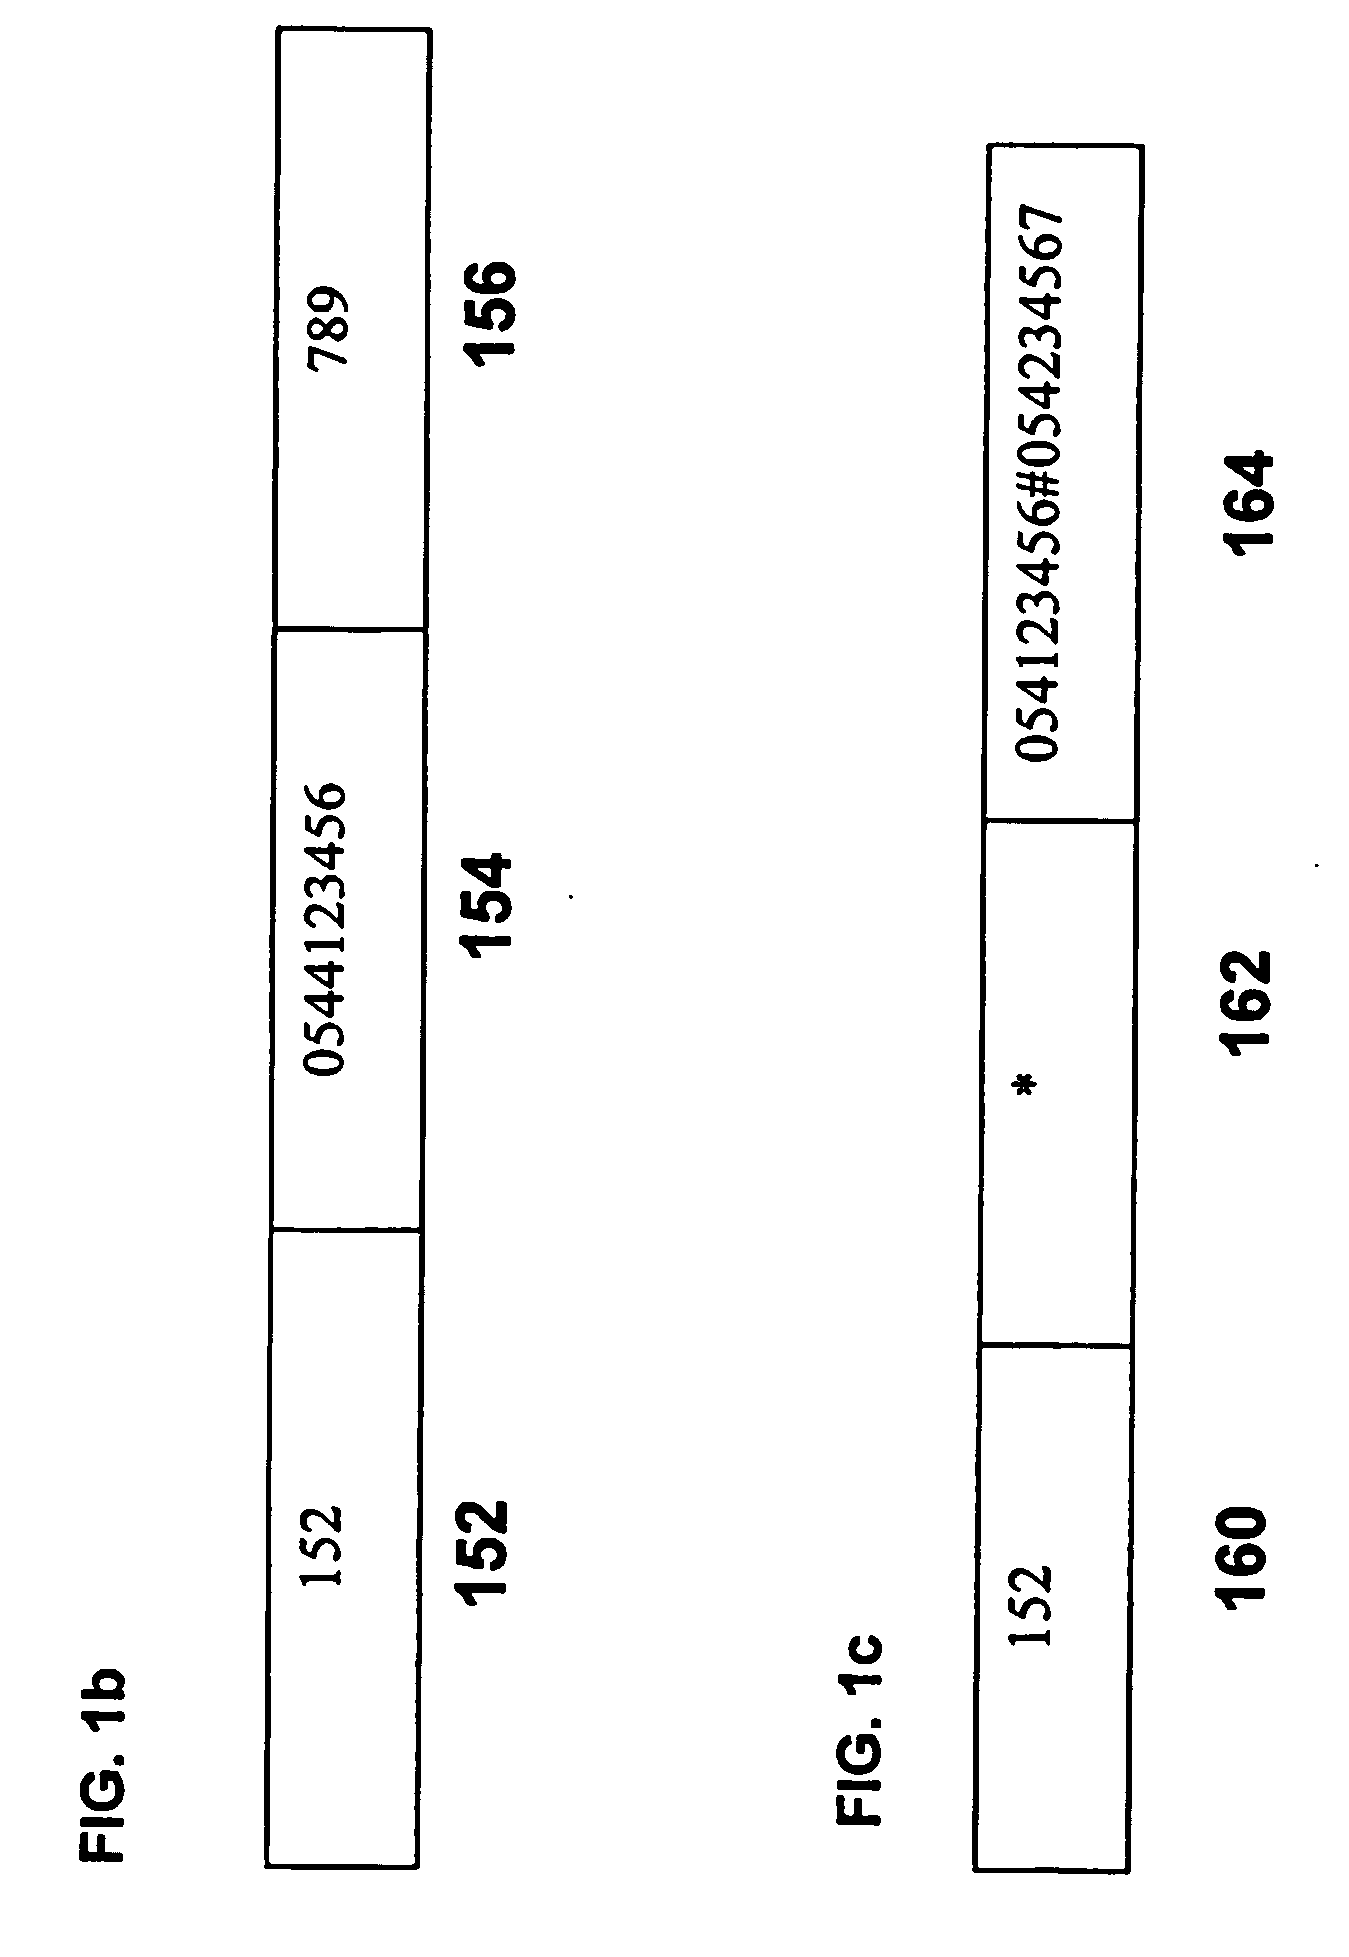 Methods and system for instant voice messaging and instant voice message retrieval